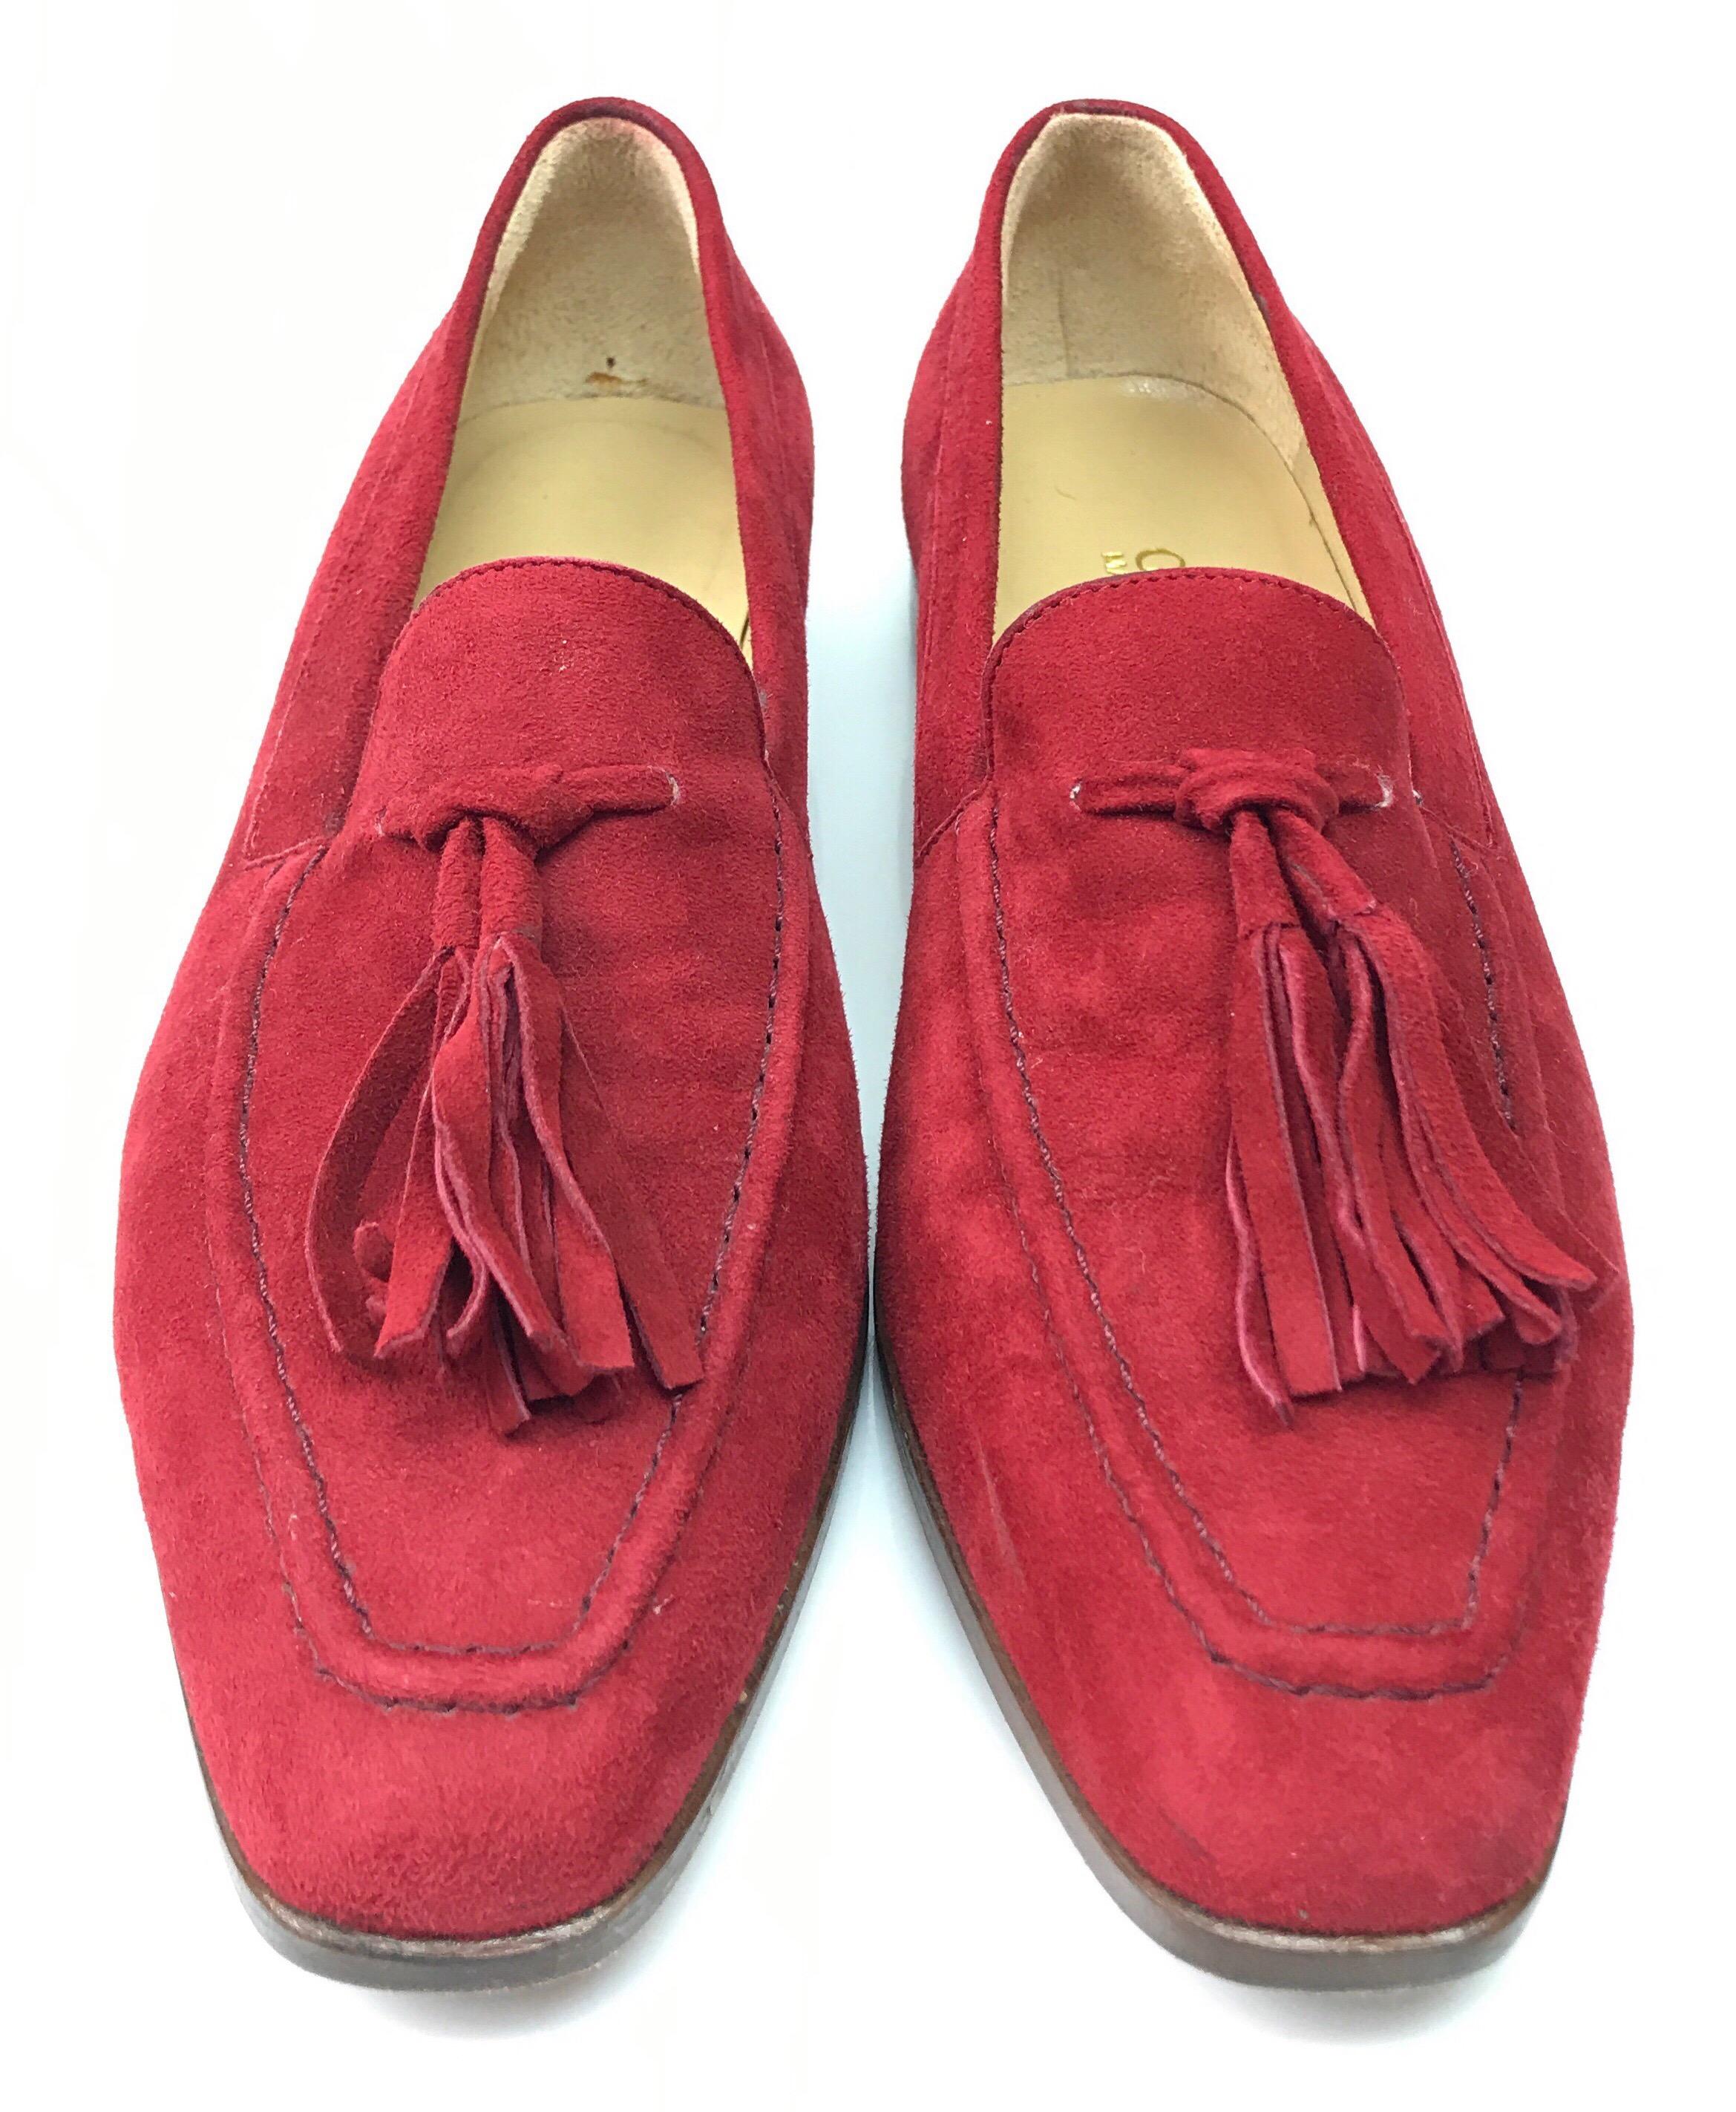 Gucci Red Suede Tassel Loafer - 6. These amazing Gucci loafers are in good condition. They are have some signs of use, including small stains on the inside, and the bottoms being rubbed off. They are made of red suede and have tassels on the front.